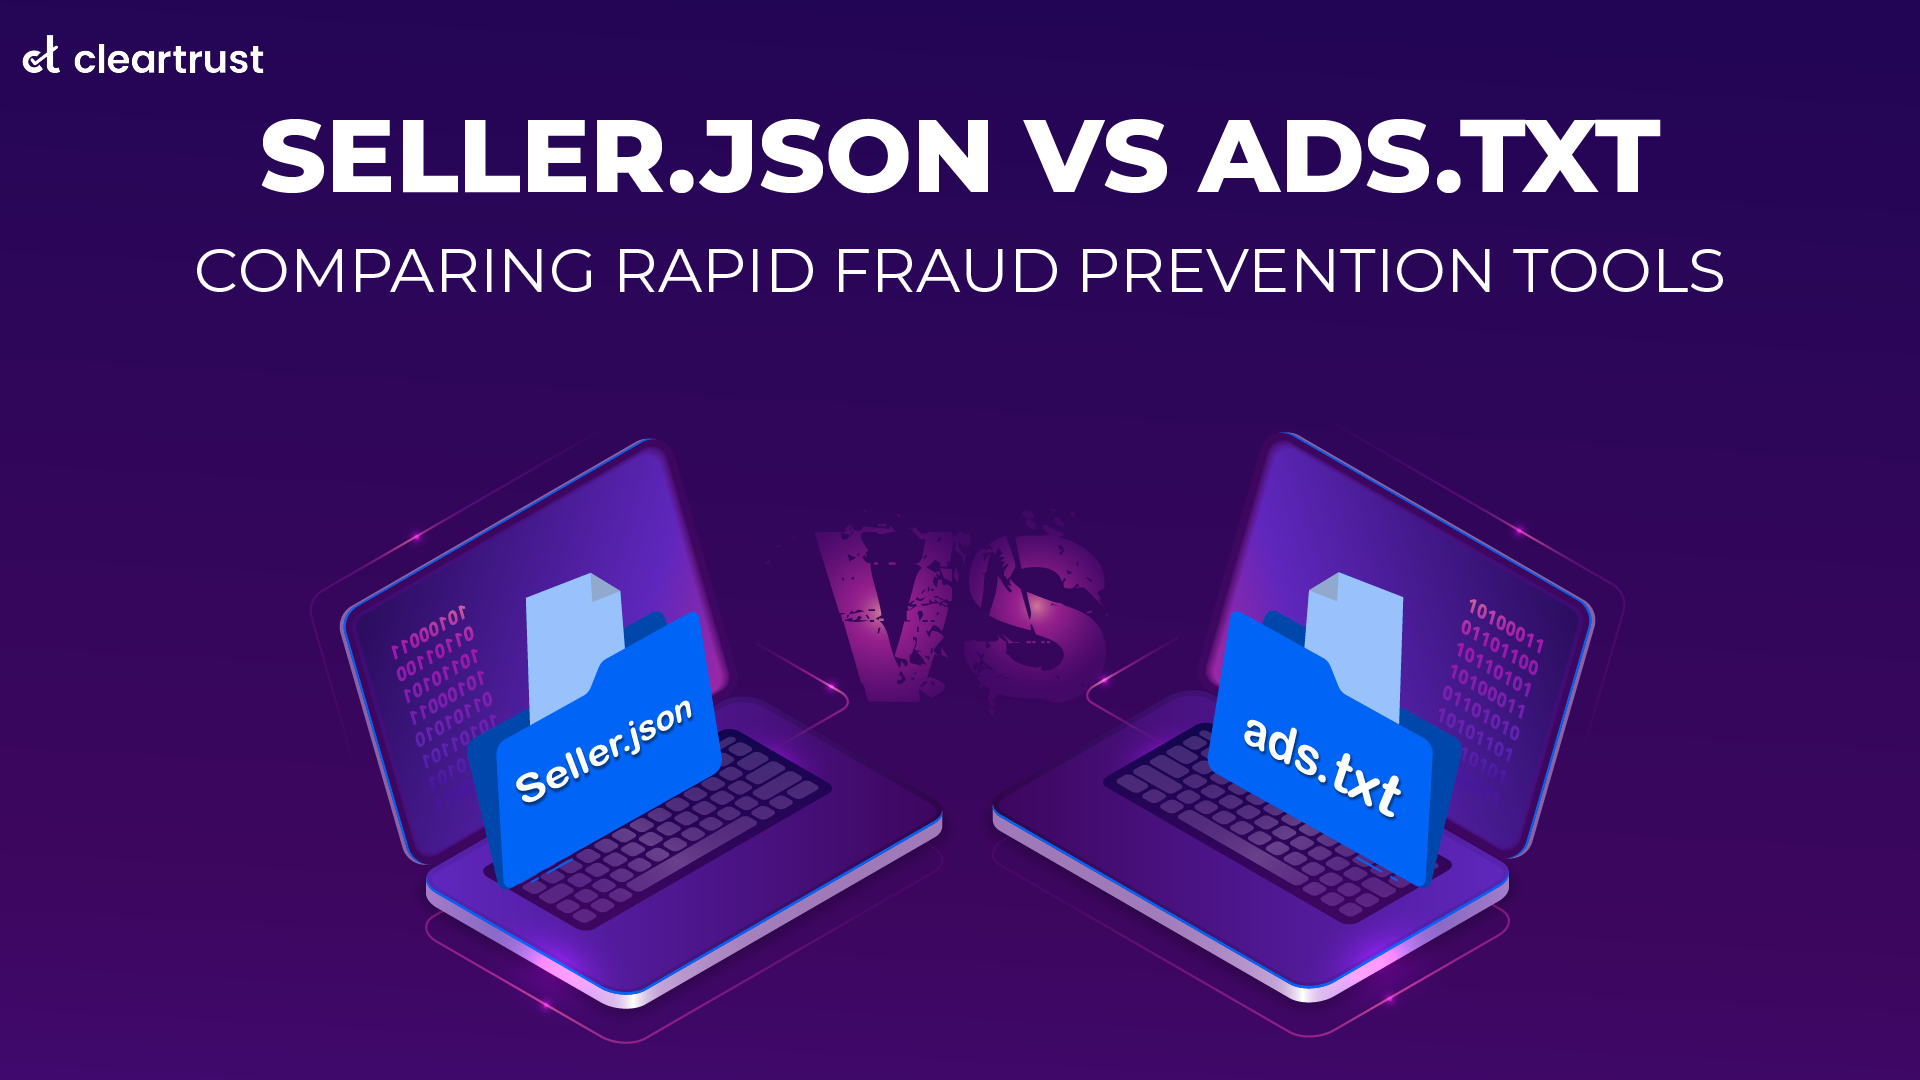 Seller.json vs Ads.txt - Comparing Rapid Fraud Prevention Tools